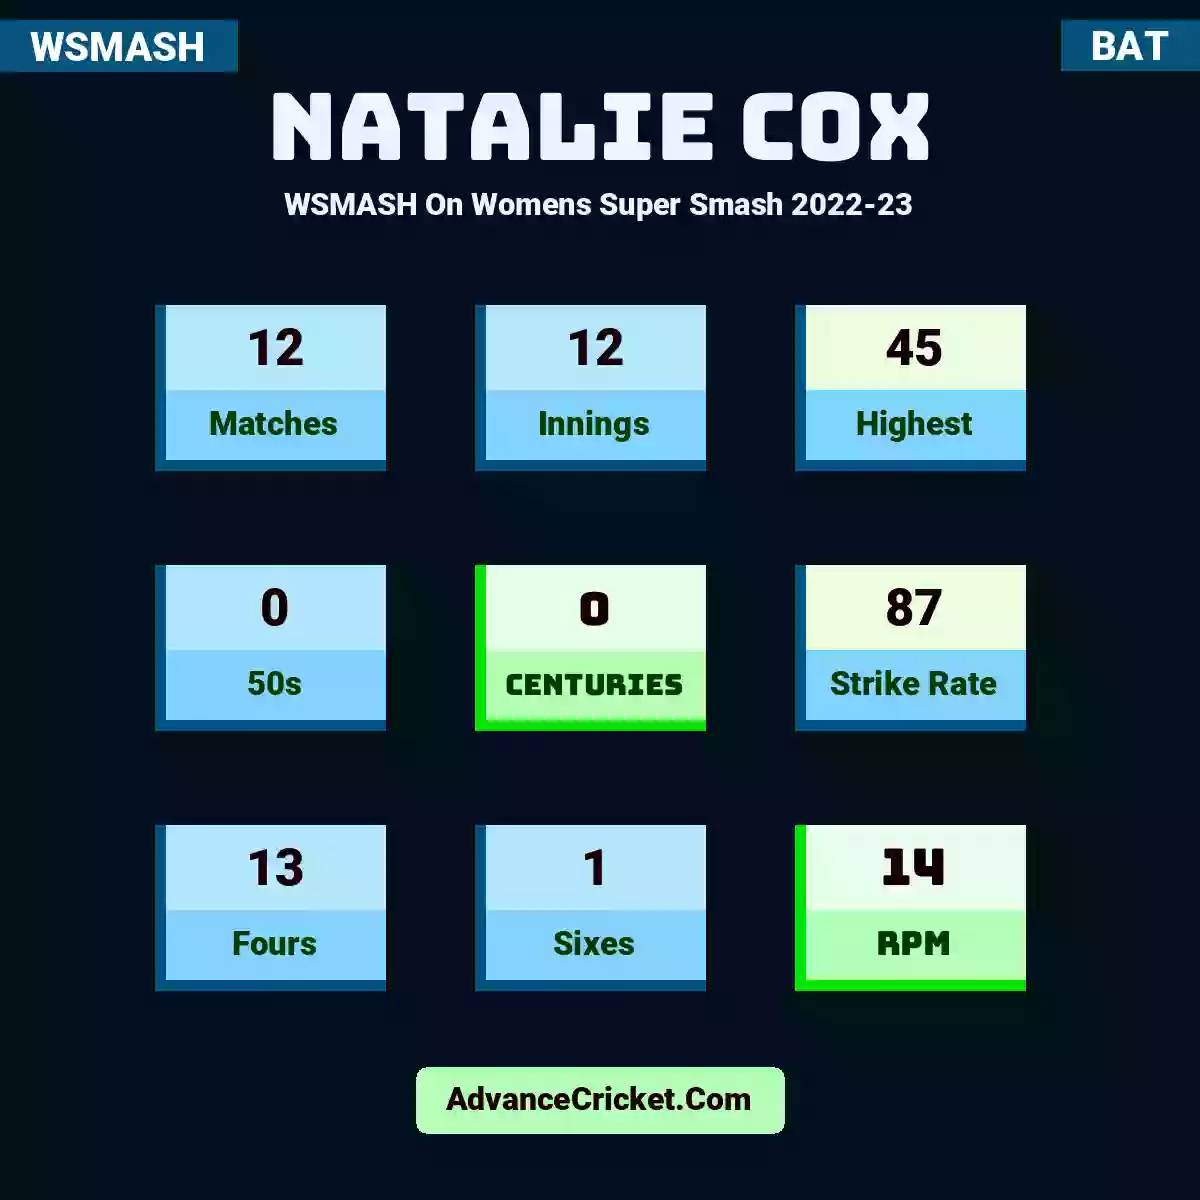 Natalie Cox WSMASH  On Womens Super Smash 2022-23, Natalie Cox played 12 matches, scored 45 runs as highest, 0 half-centuries, and 0 centuries, with a strike rate of 87. N.Cox hit 13 fours and 1 sixes, with an RPM of 14.